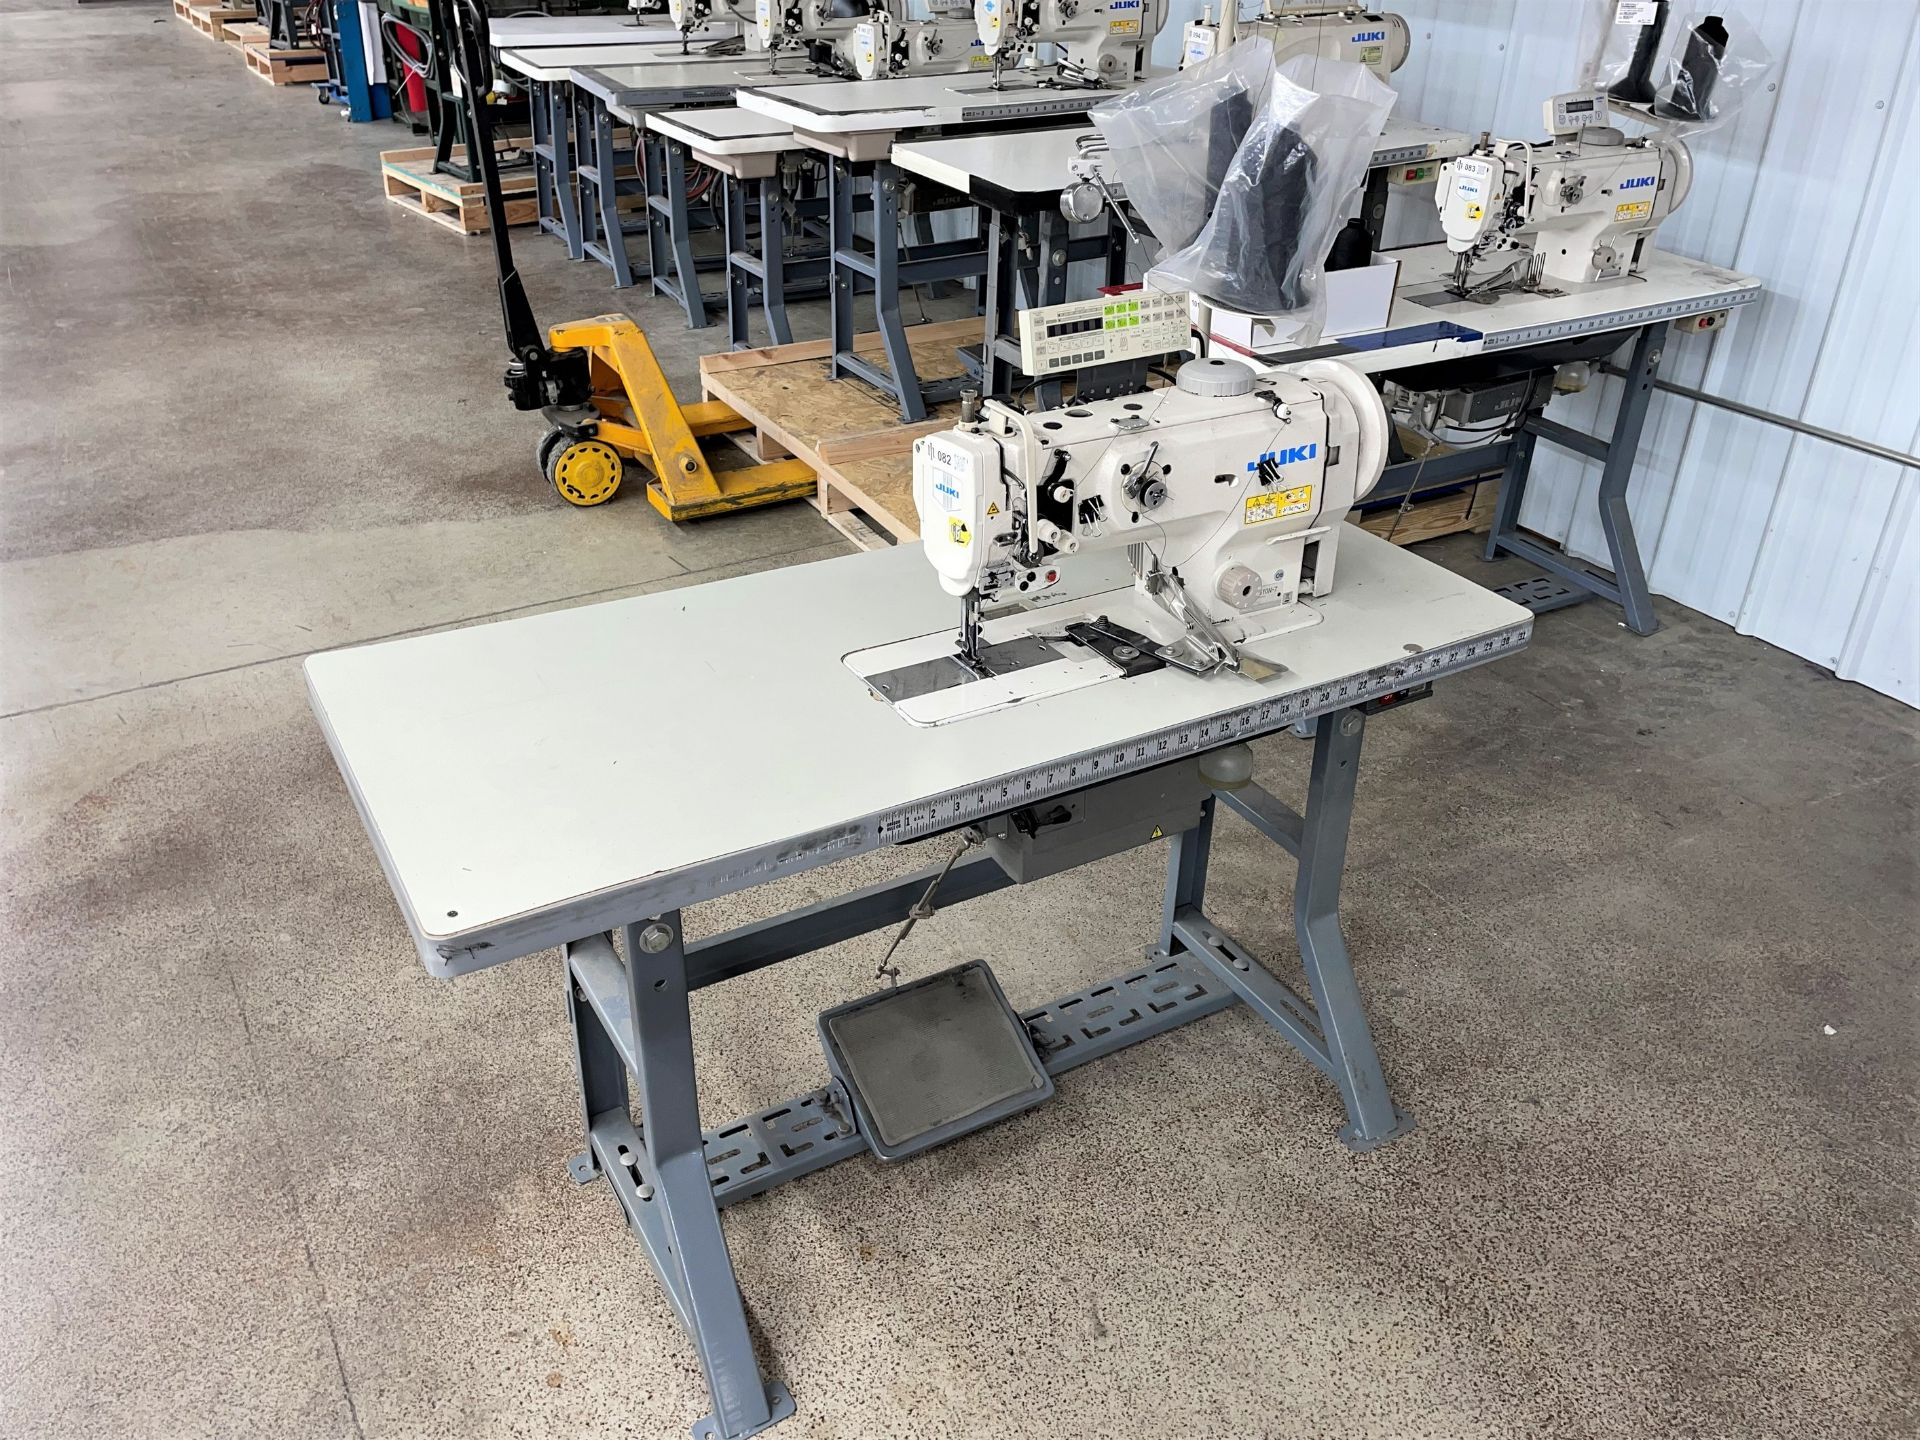 Juki Industrial Sewing Machine with Table - Image 9 of 9